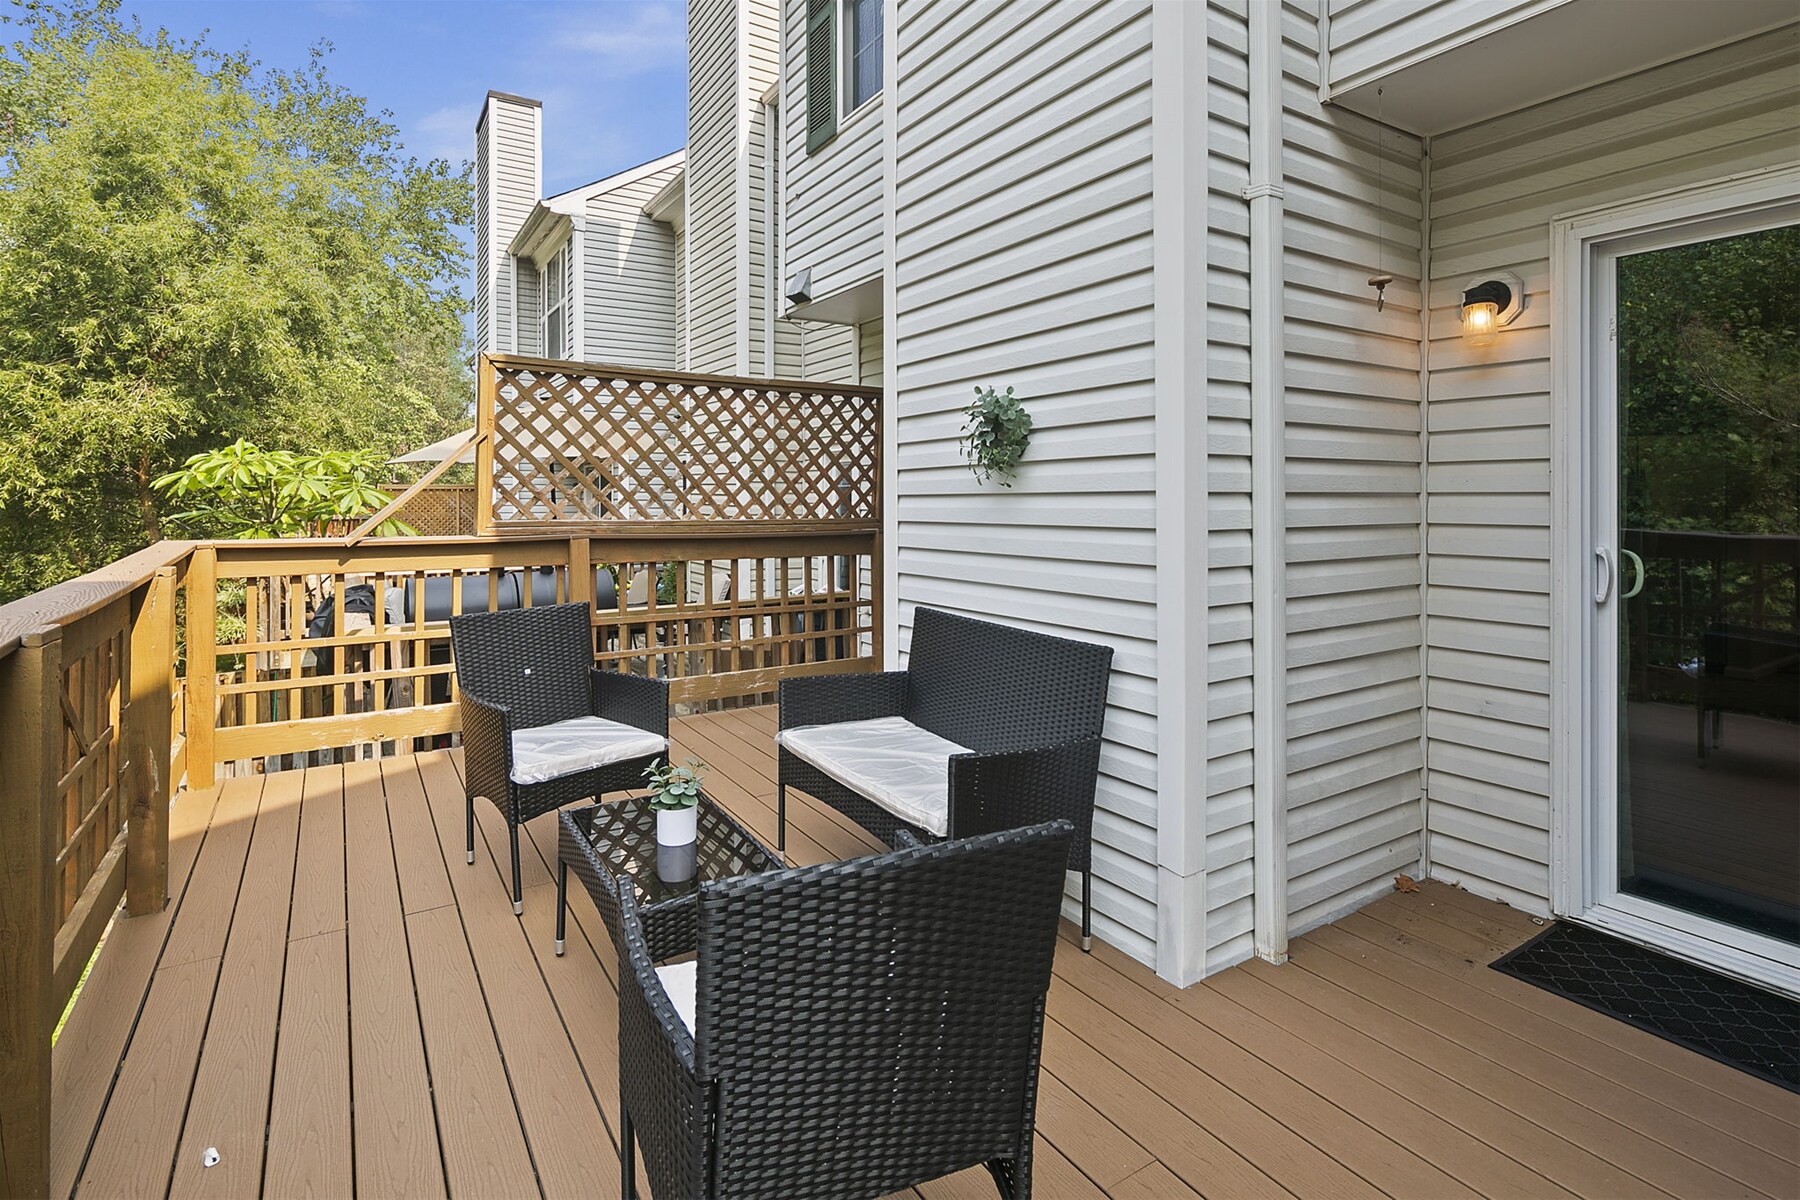 Finchvale: Work-Friendly, Private Yard, Near DC, by Newman Hospitality